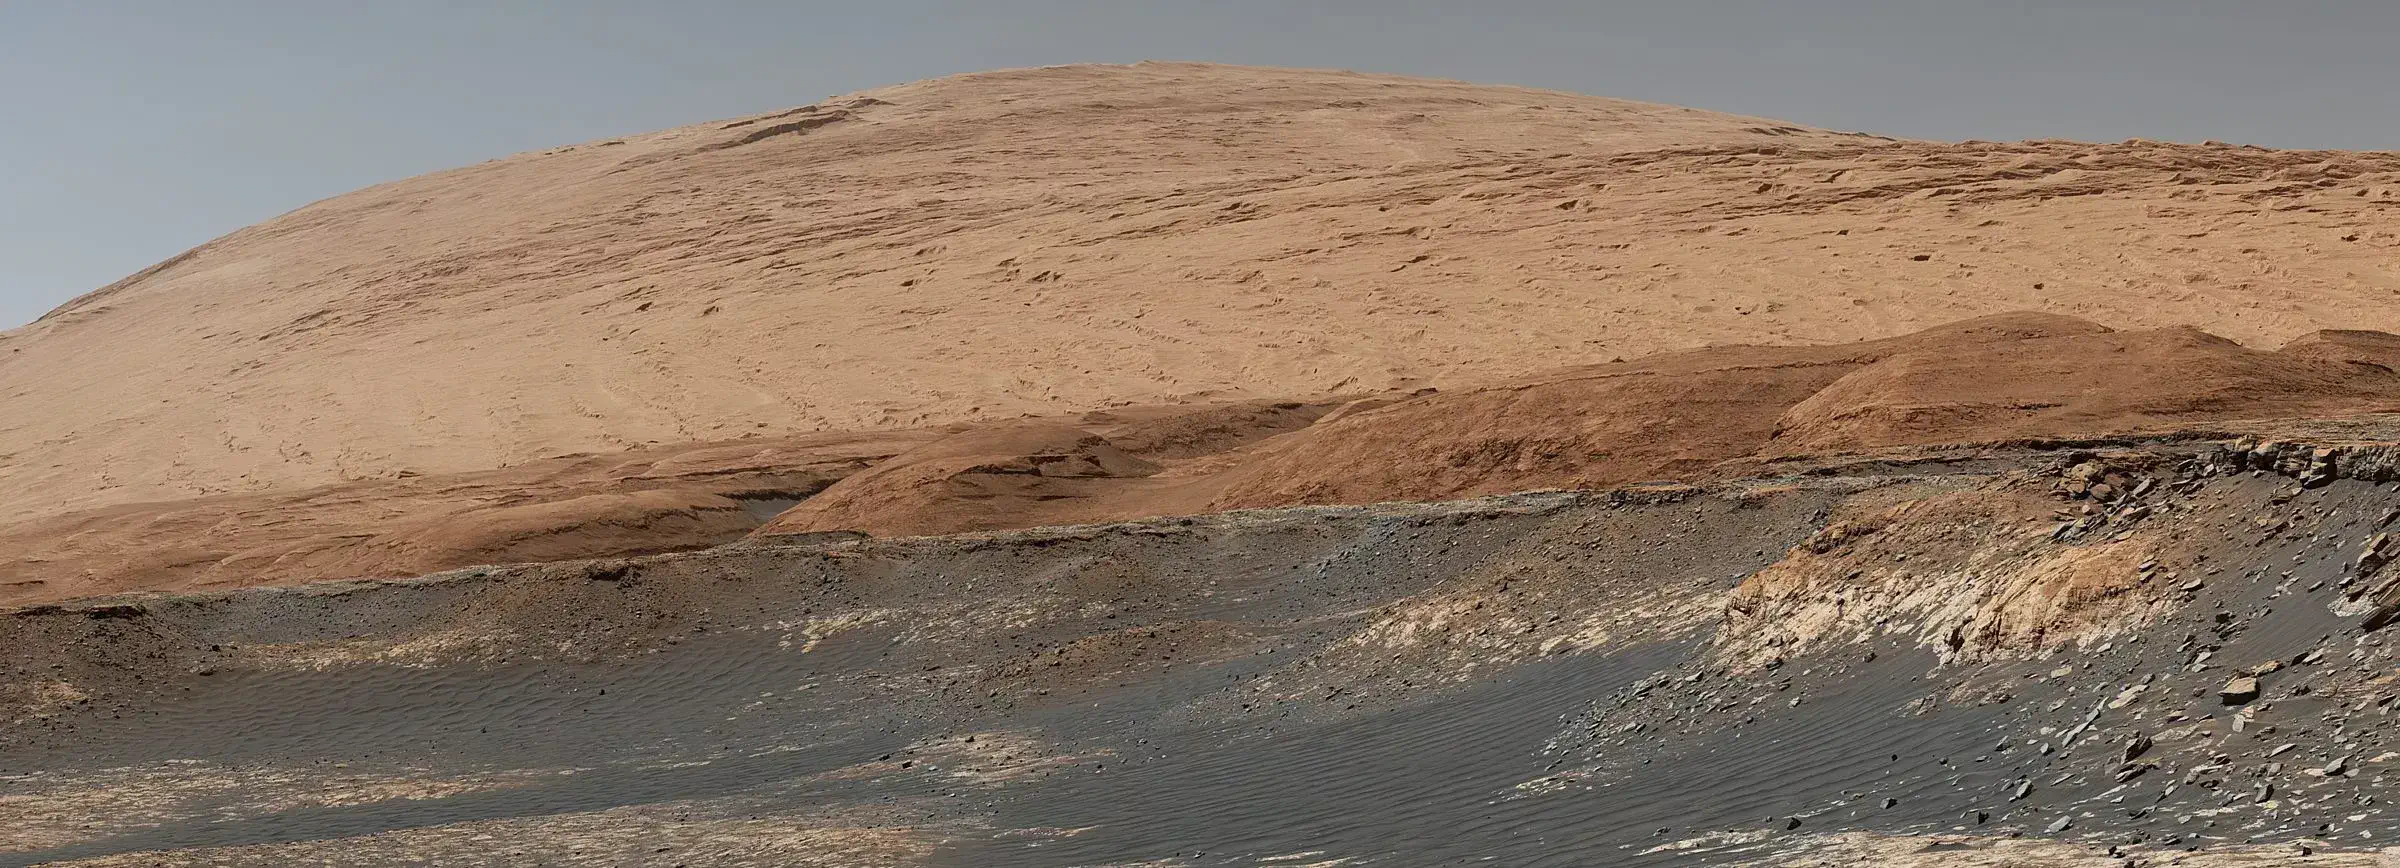 MARS OR EARTH? This image, cropped from a 116-frame panorama captured by NASA’s Curiosity rover in January 2020, shows Mount Sharp on Mars. The scene looks remarkably similar to the landscape found in some parts of the southwestern United States. NASA/JPL-Caltech/MSSS